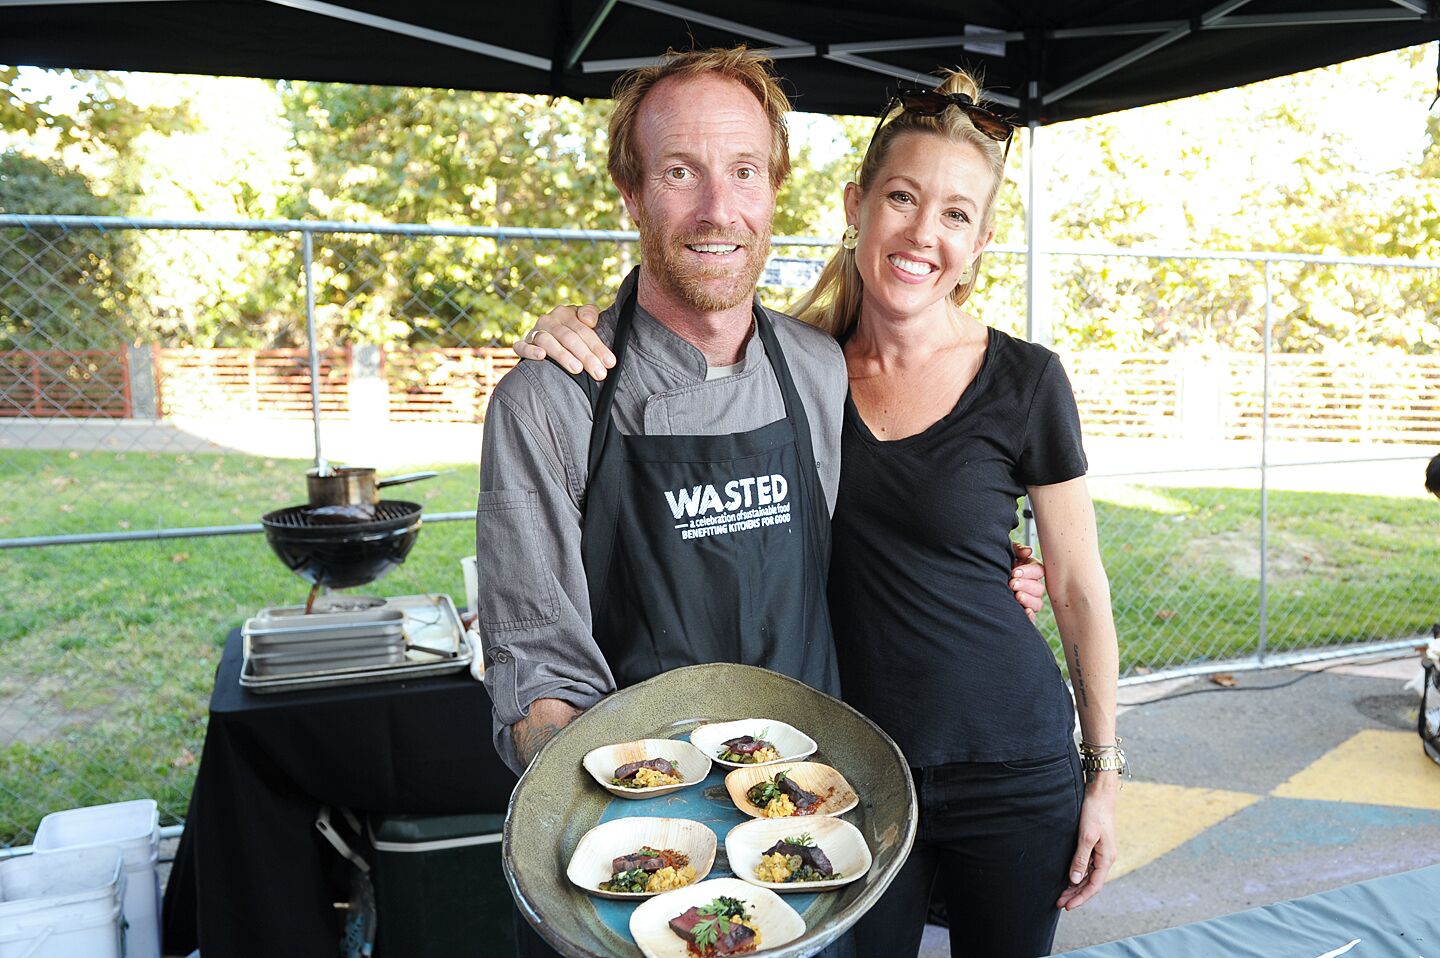 WASTED: A Celebration of Sustainable Food